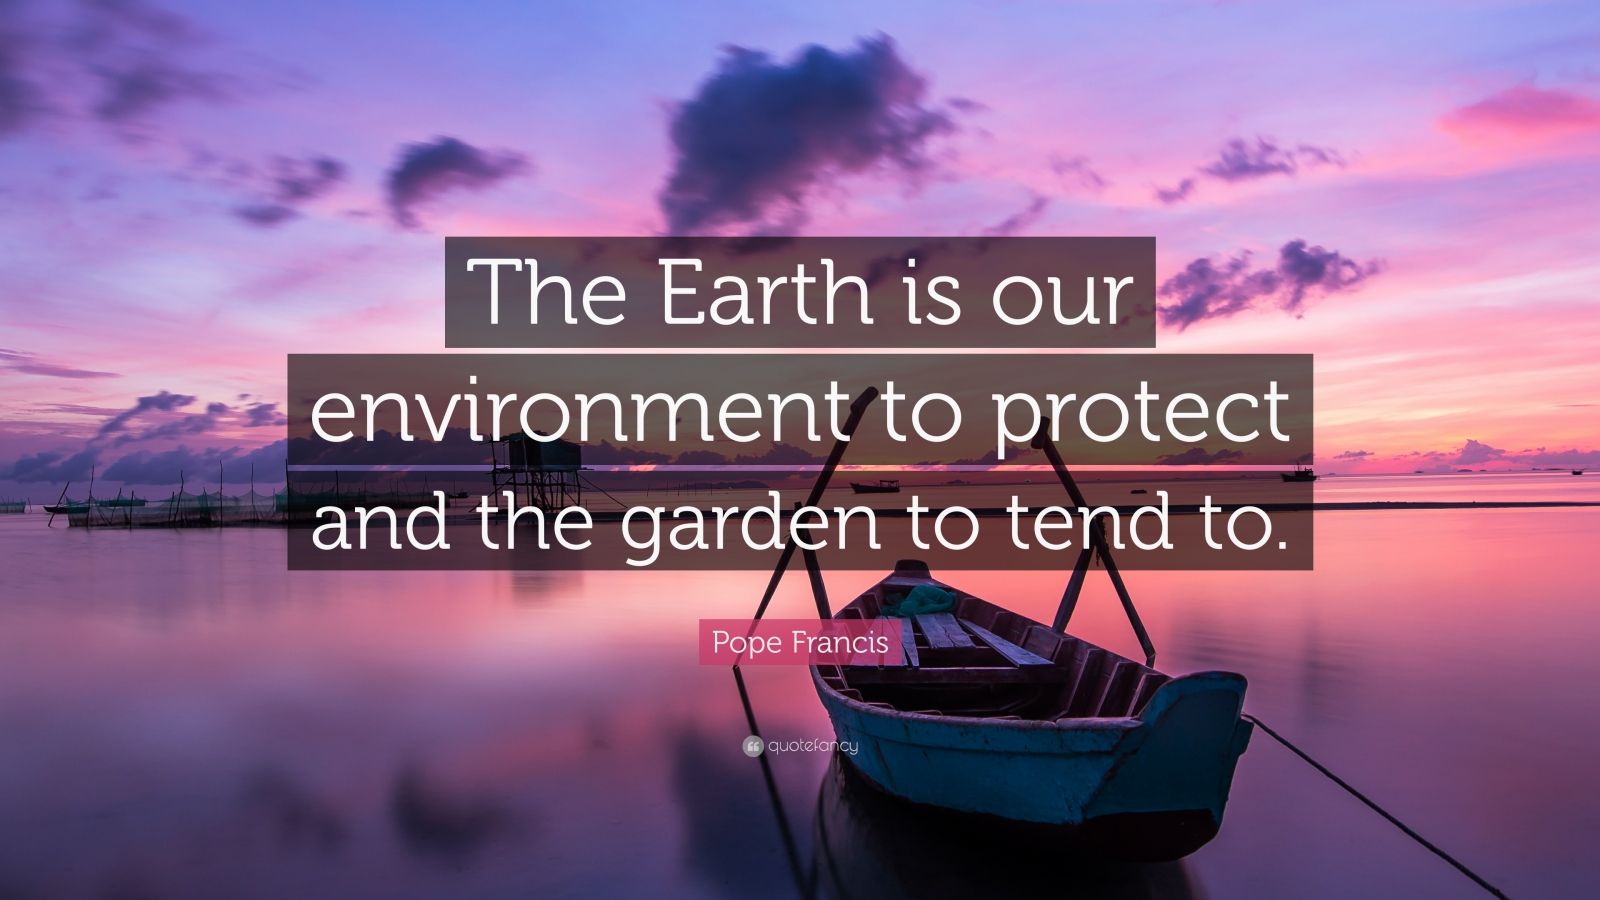 Pope Francis Quote: “The Earth is our environment to protect and the